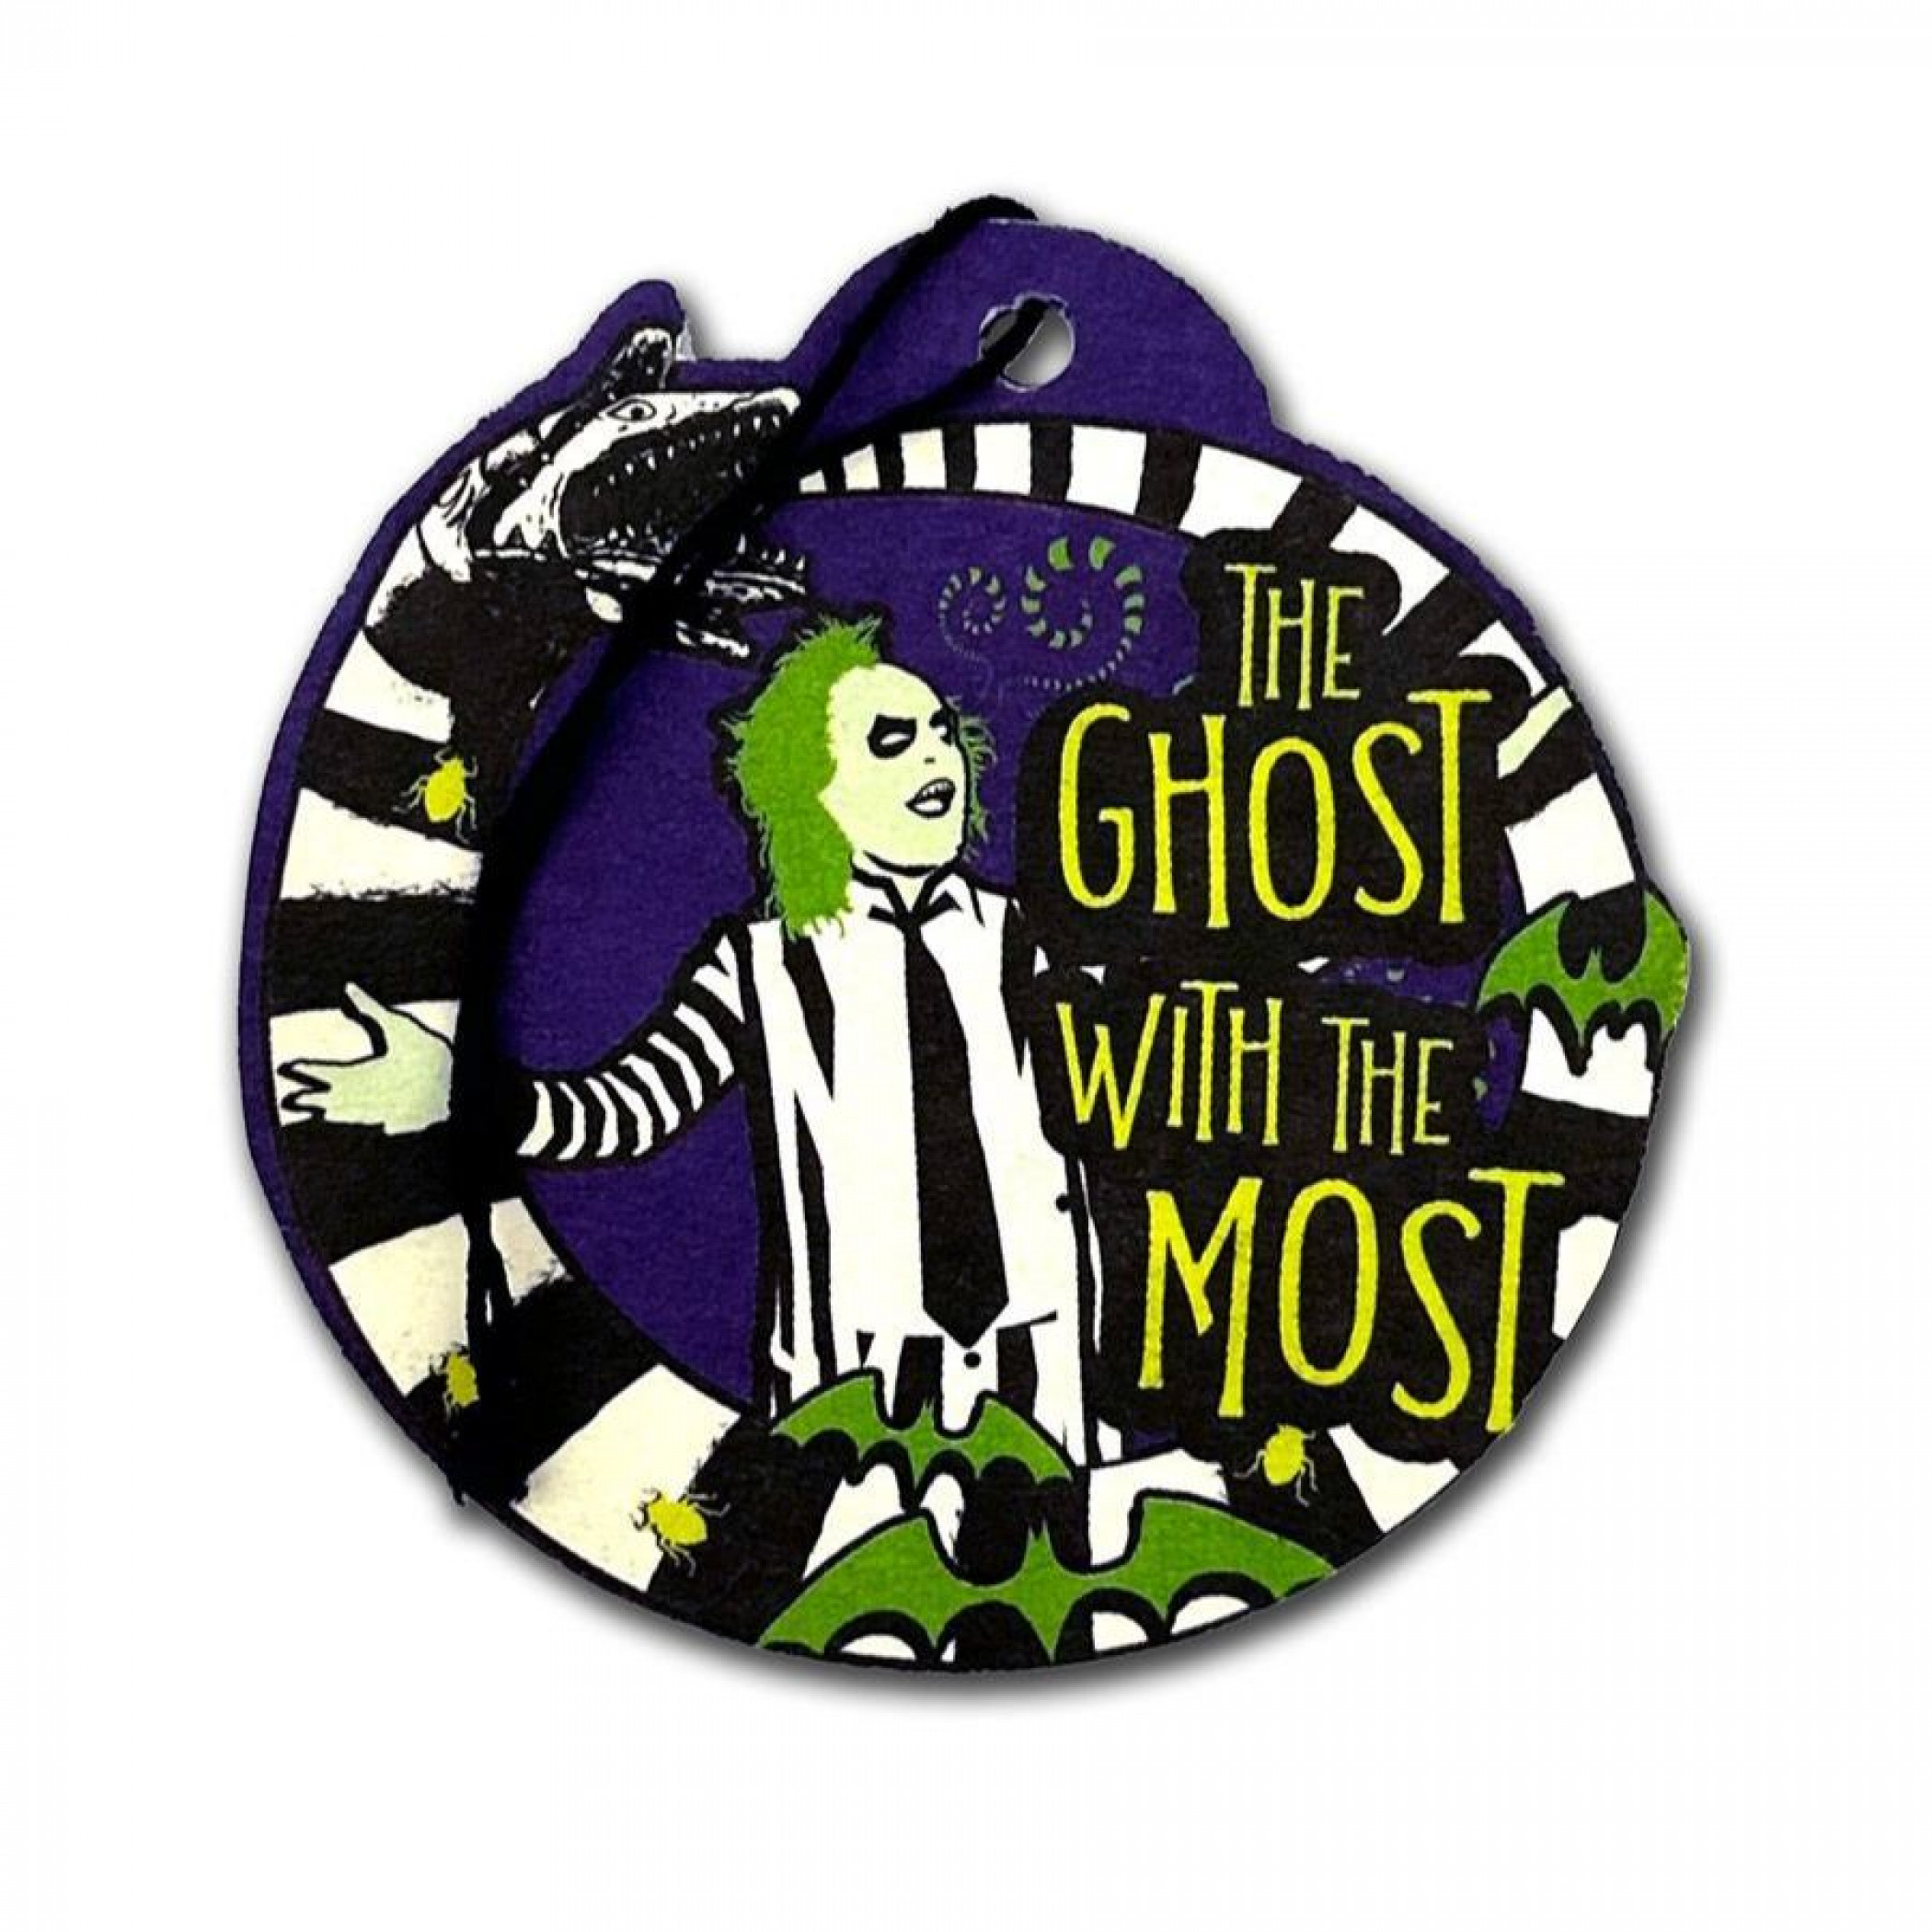 Beetlejuice Midnight Chiller Scent Air Freshener - 2 Pack